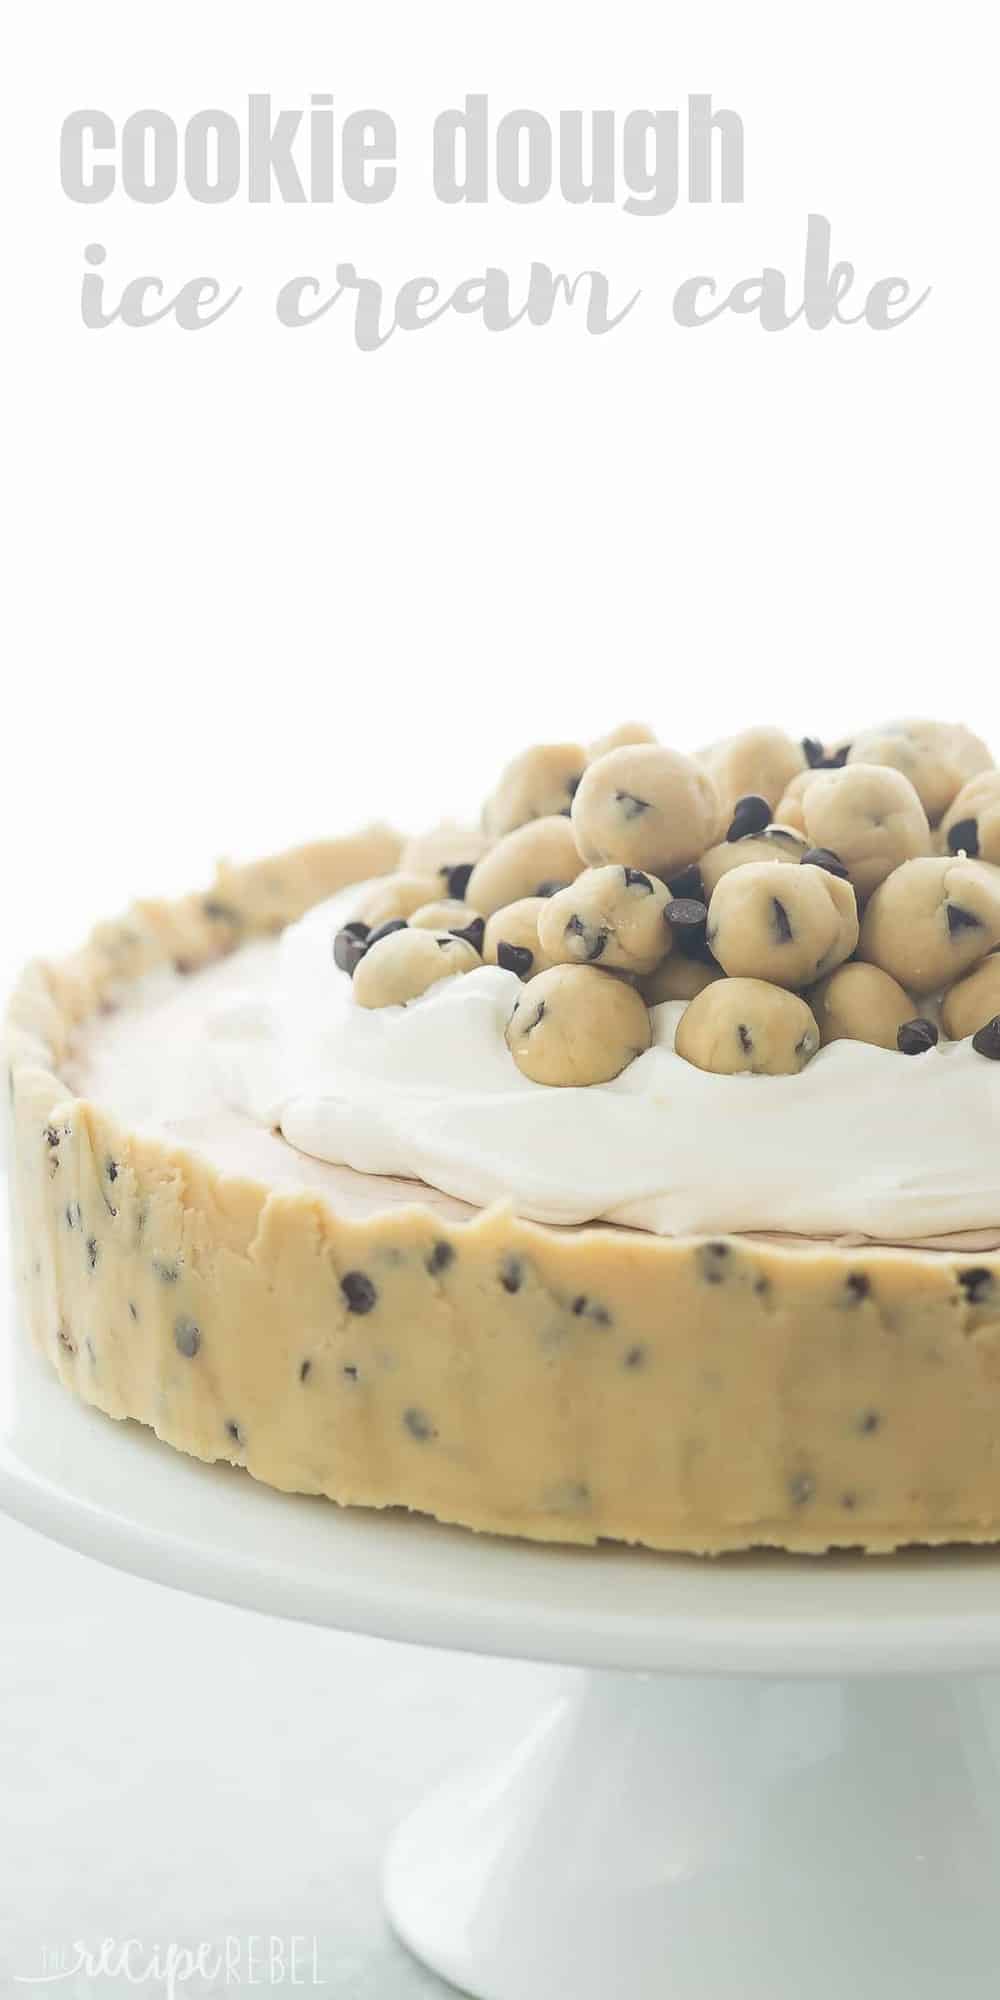 tall close up image of cookie dough ice cream cake with cookie dough balls on top